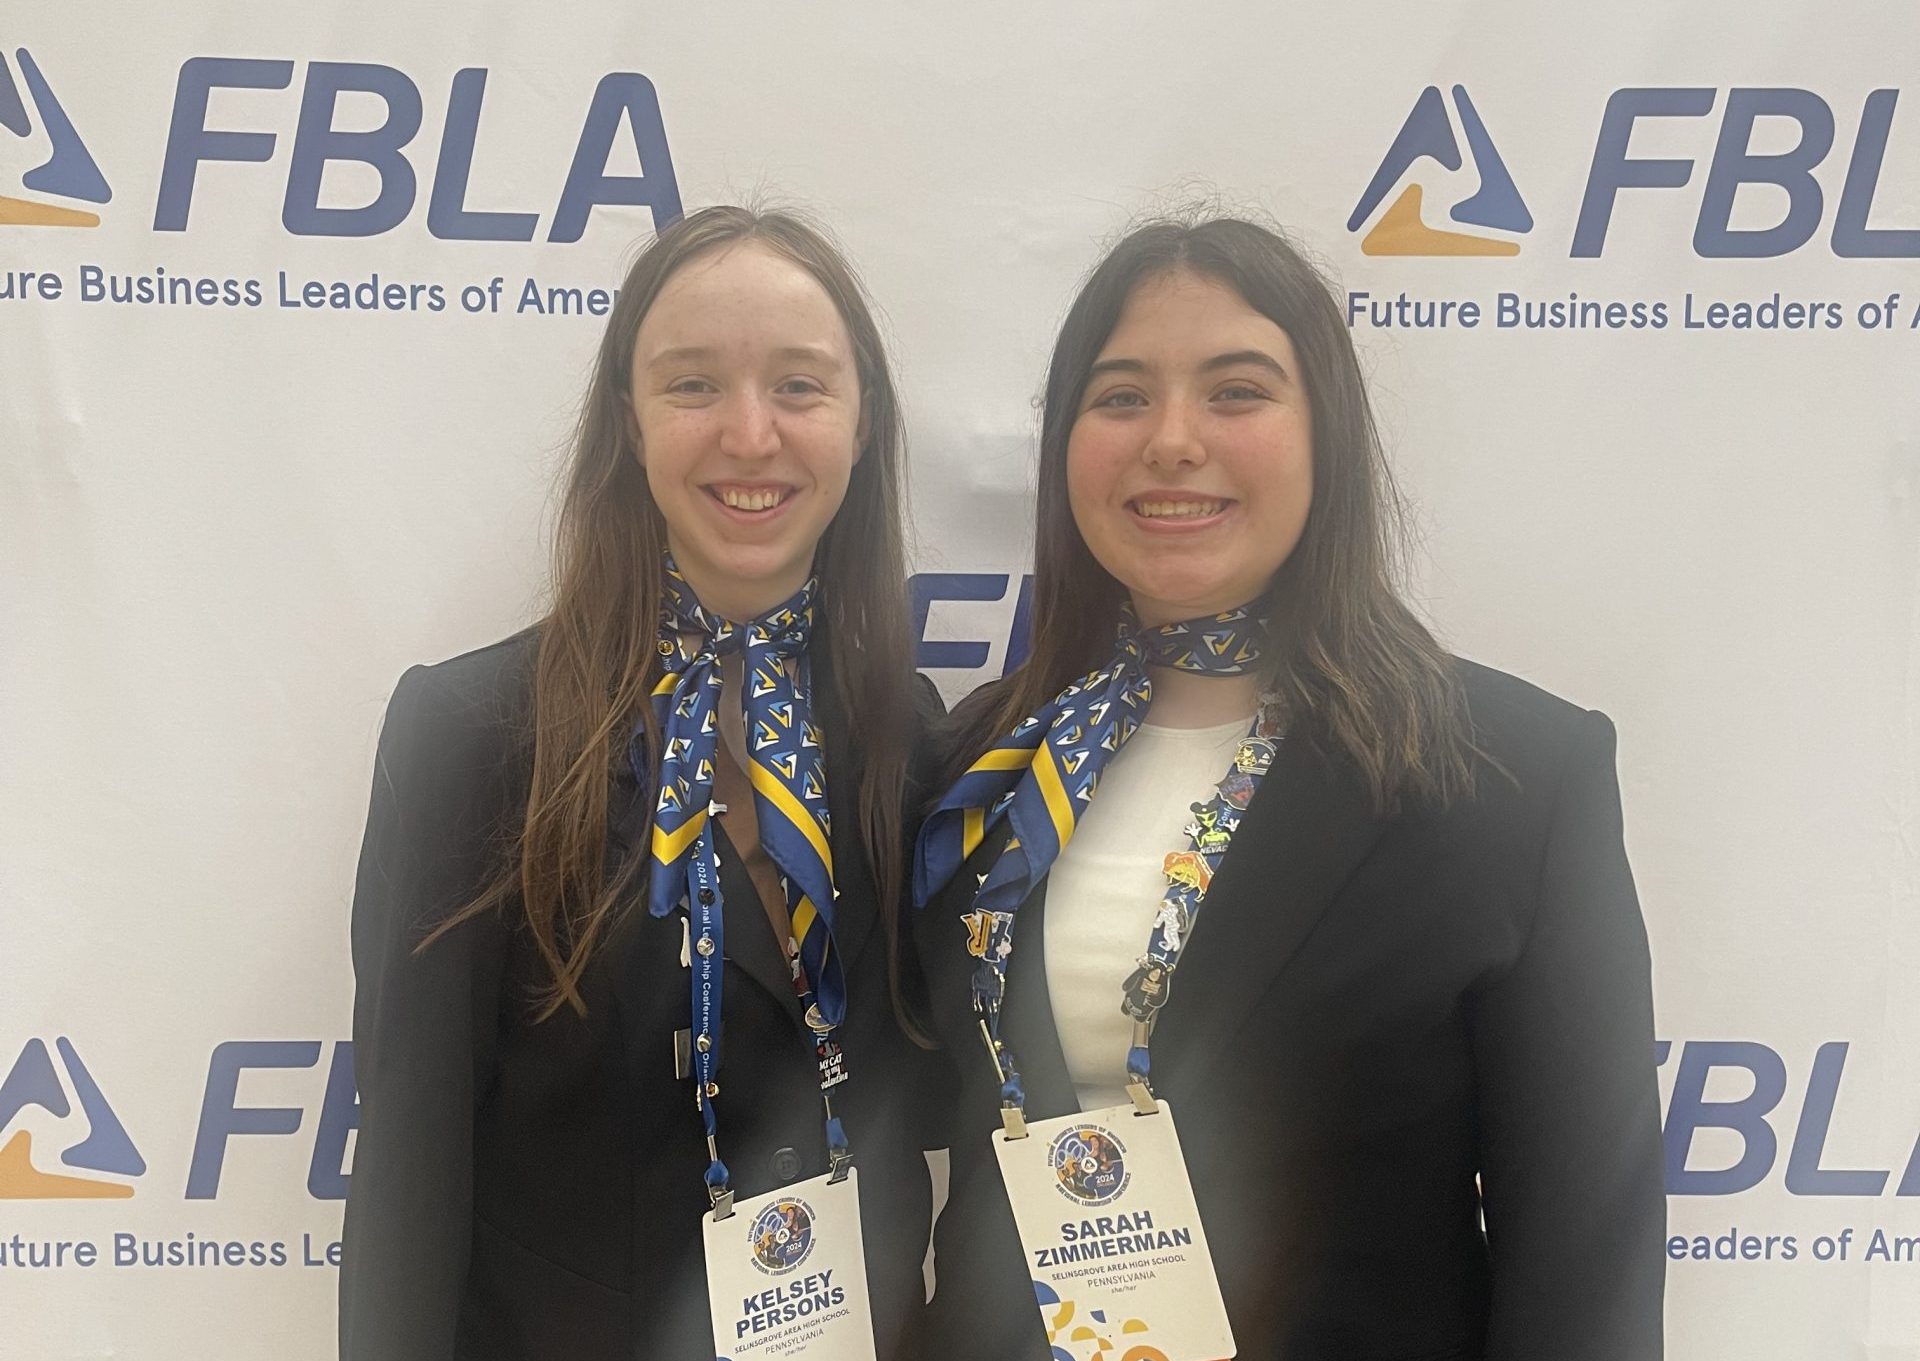 The Team of Kelsey Persons and Elise Zimmerman are 2nd in the Nation in FBLA’s Introduction to Event Planning.  Congrats ladies.  Go Seals!